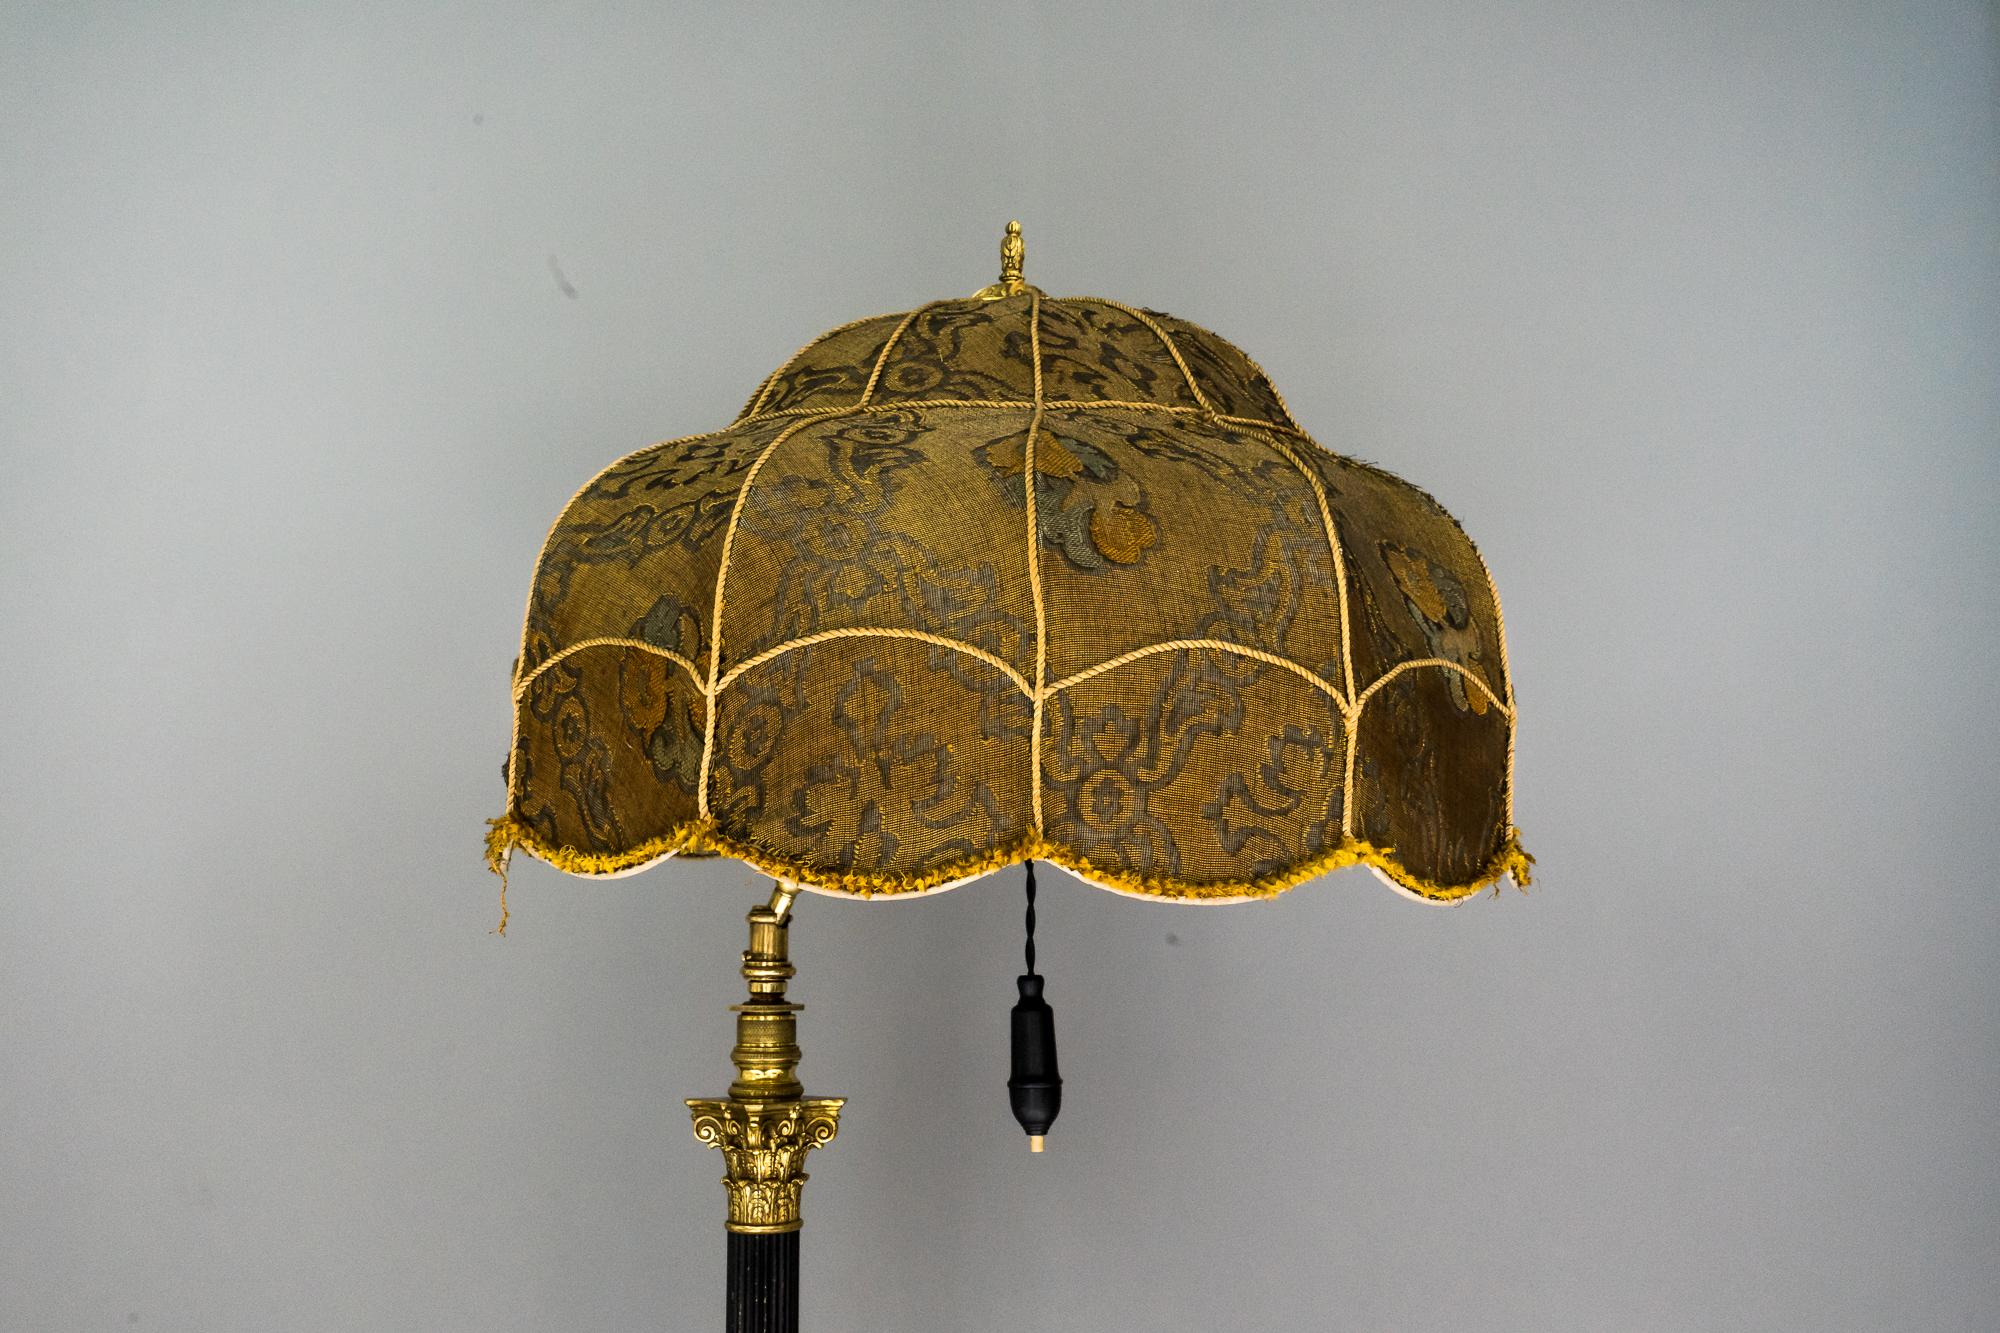 Antique Empire style floor lamp, Vienna, circa 1890s
Original condition
Original shade unfortunately damaged but we can send the original damaged shade so that it can be re-covered.
The damaged shade is not calculated in the price.
If the